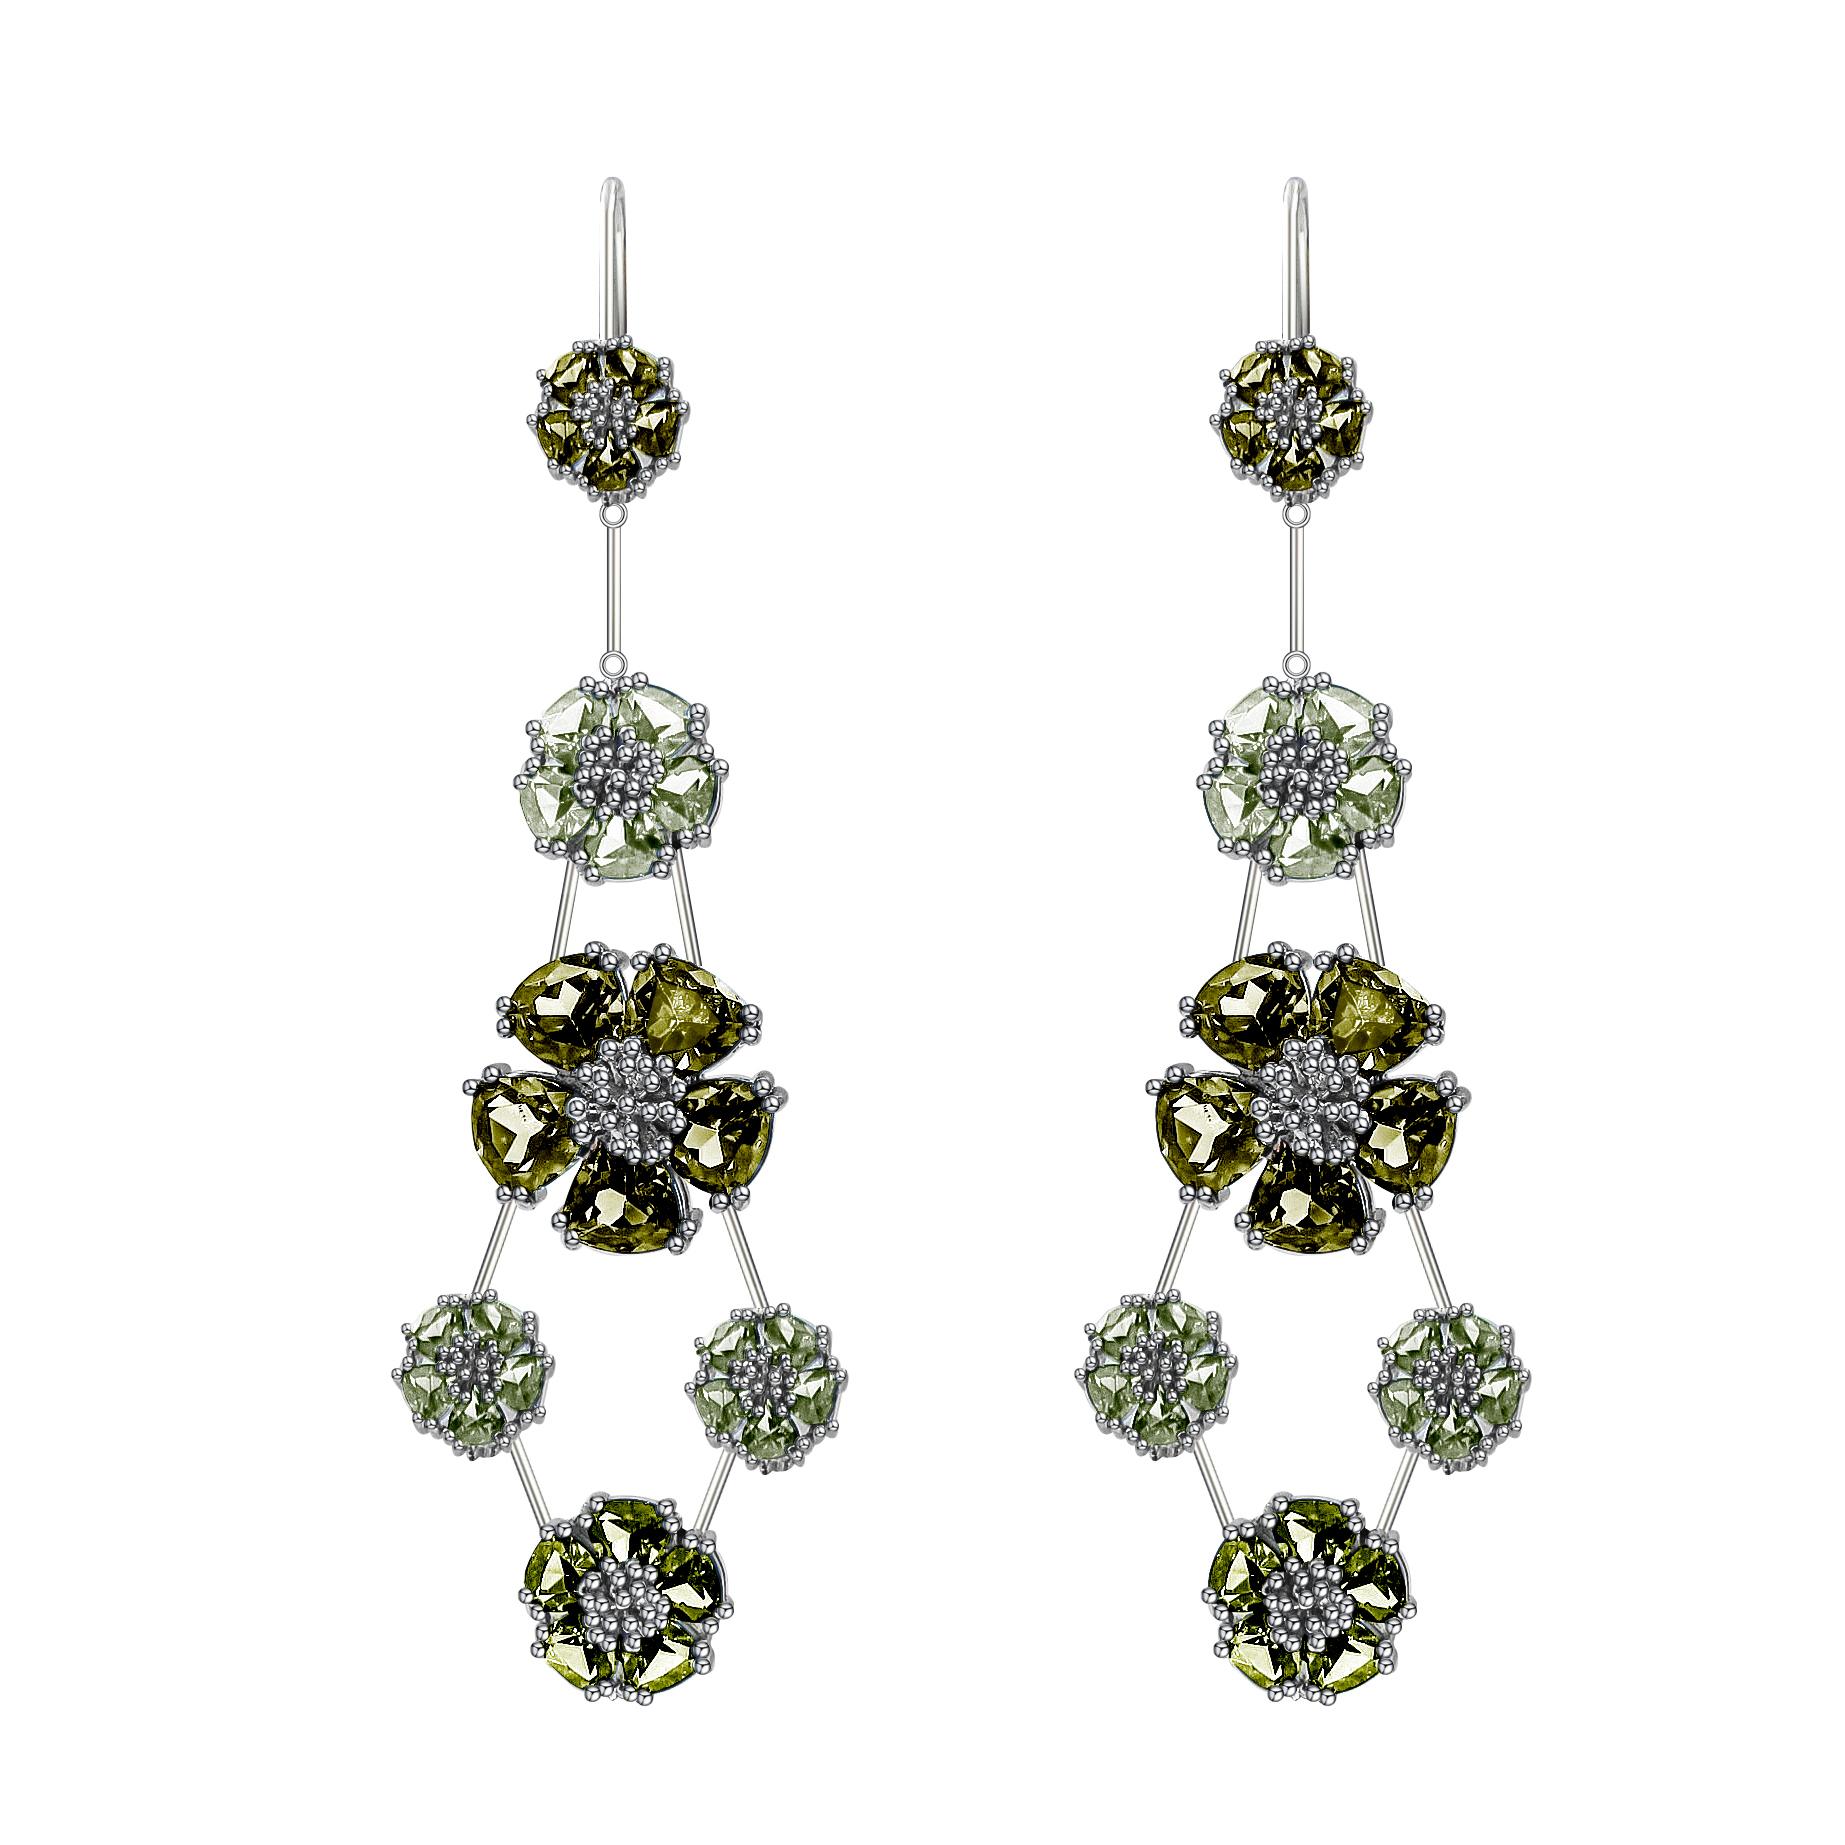 Designed in NYC

.925 Sterling Silver 6 x 7mm, 10 mm and 15 mm Dark Blue Topaz and Light Blue Topaz Blossom Double-Tier Chandelier Earrings. No matter the season, allow natural beauty to surround you wherever you go. Blossom double-tier chandelier